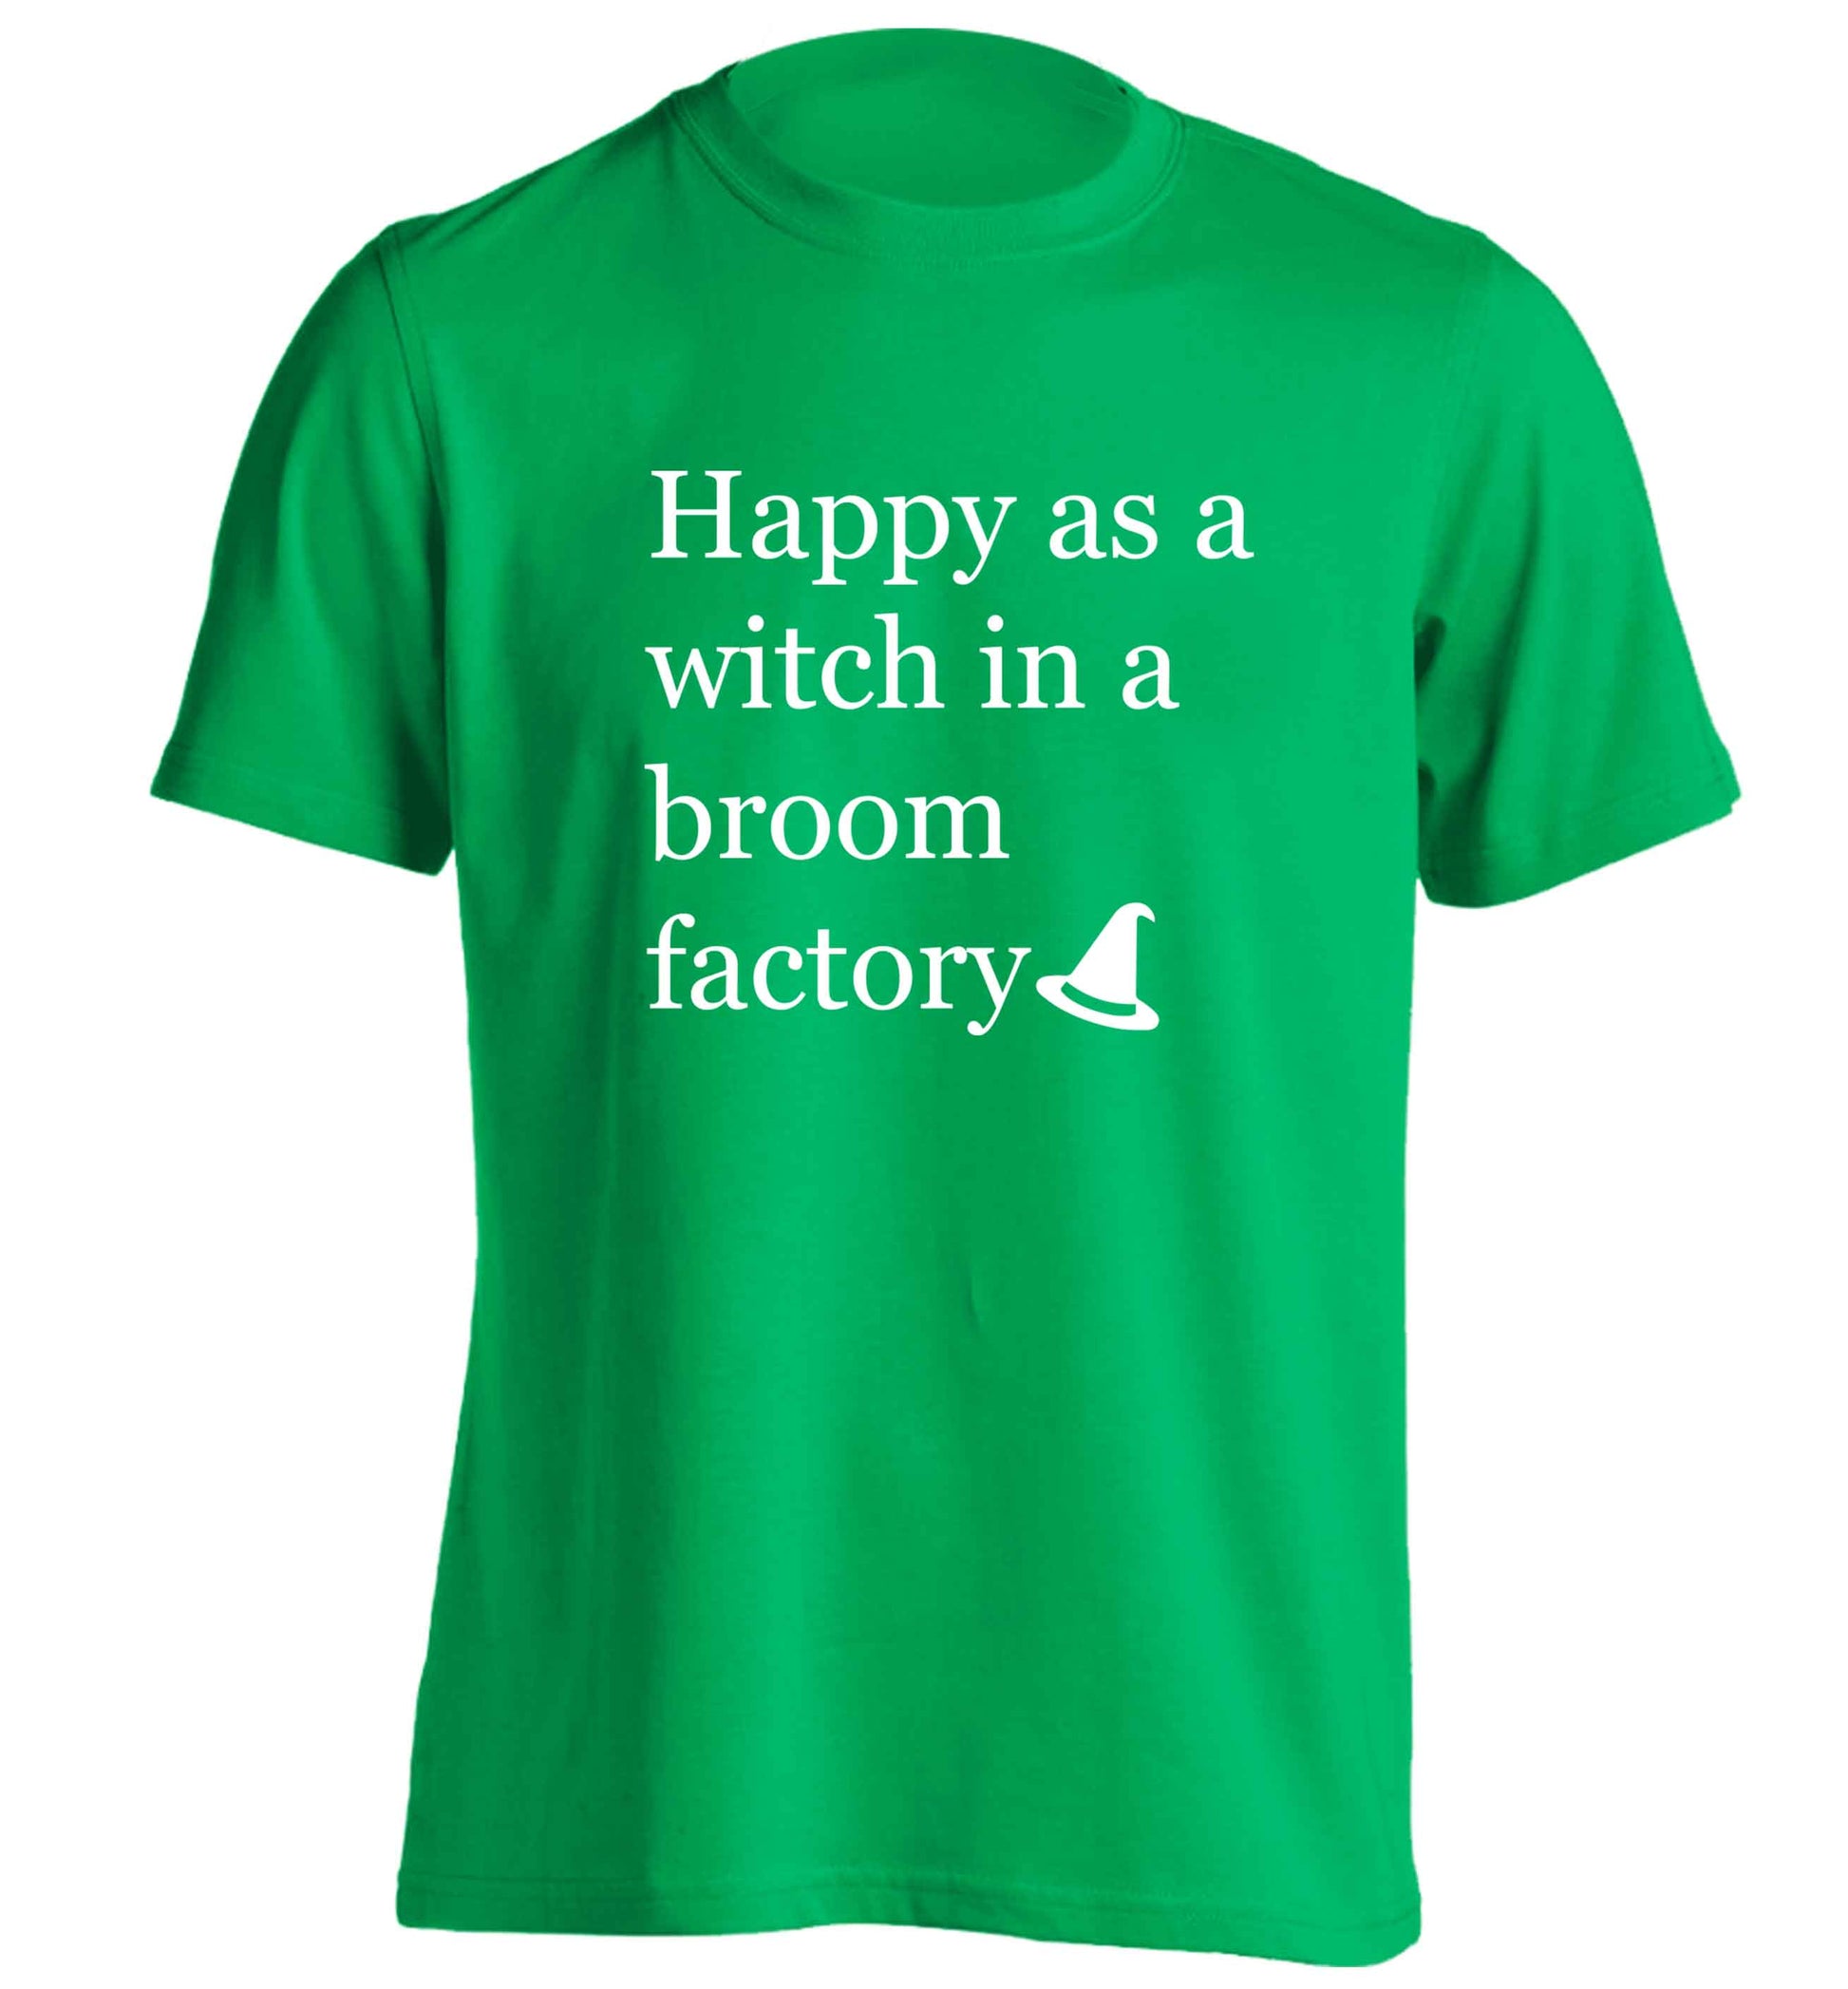 Happy as a witch in a broom factory adults unisex green Tshirt 2XL